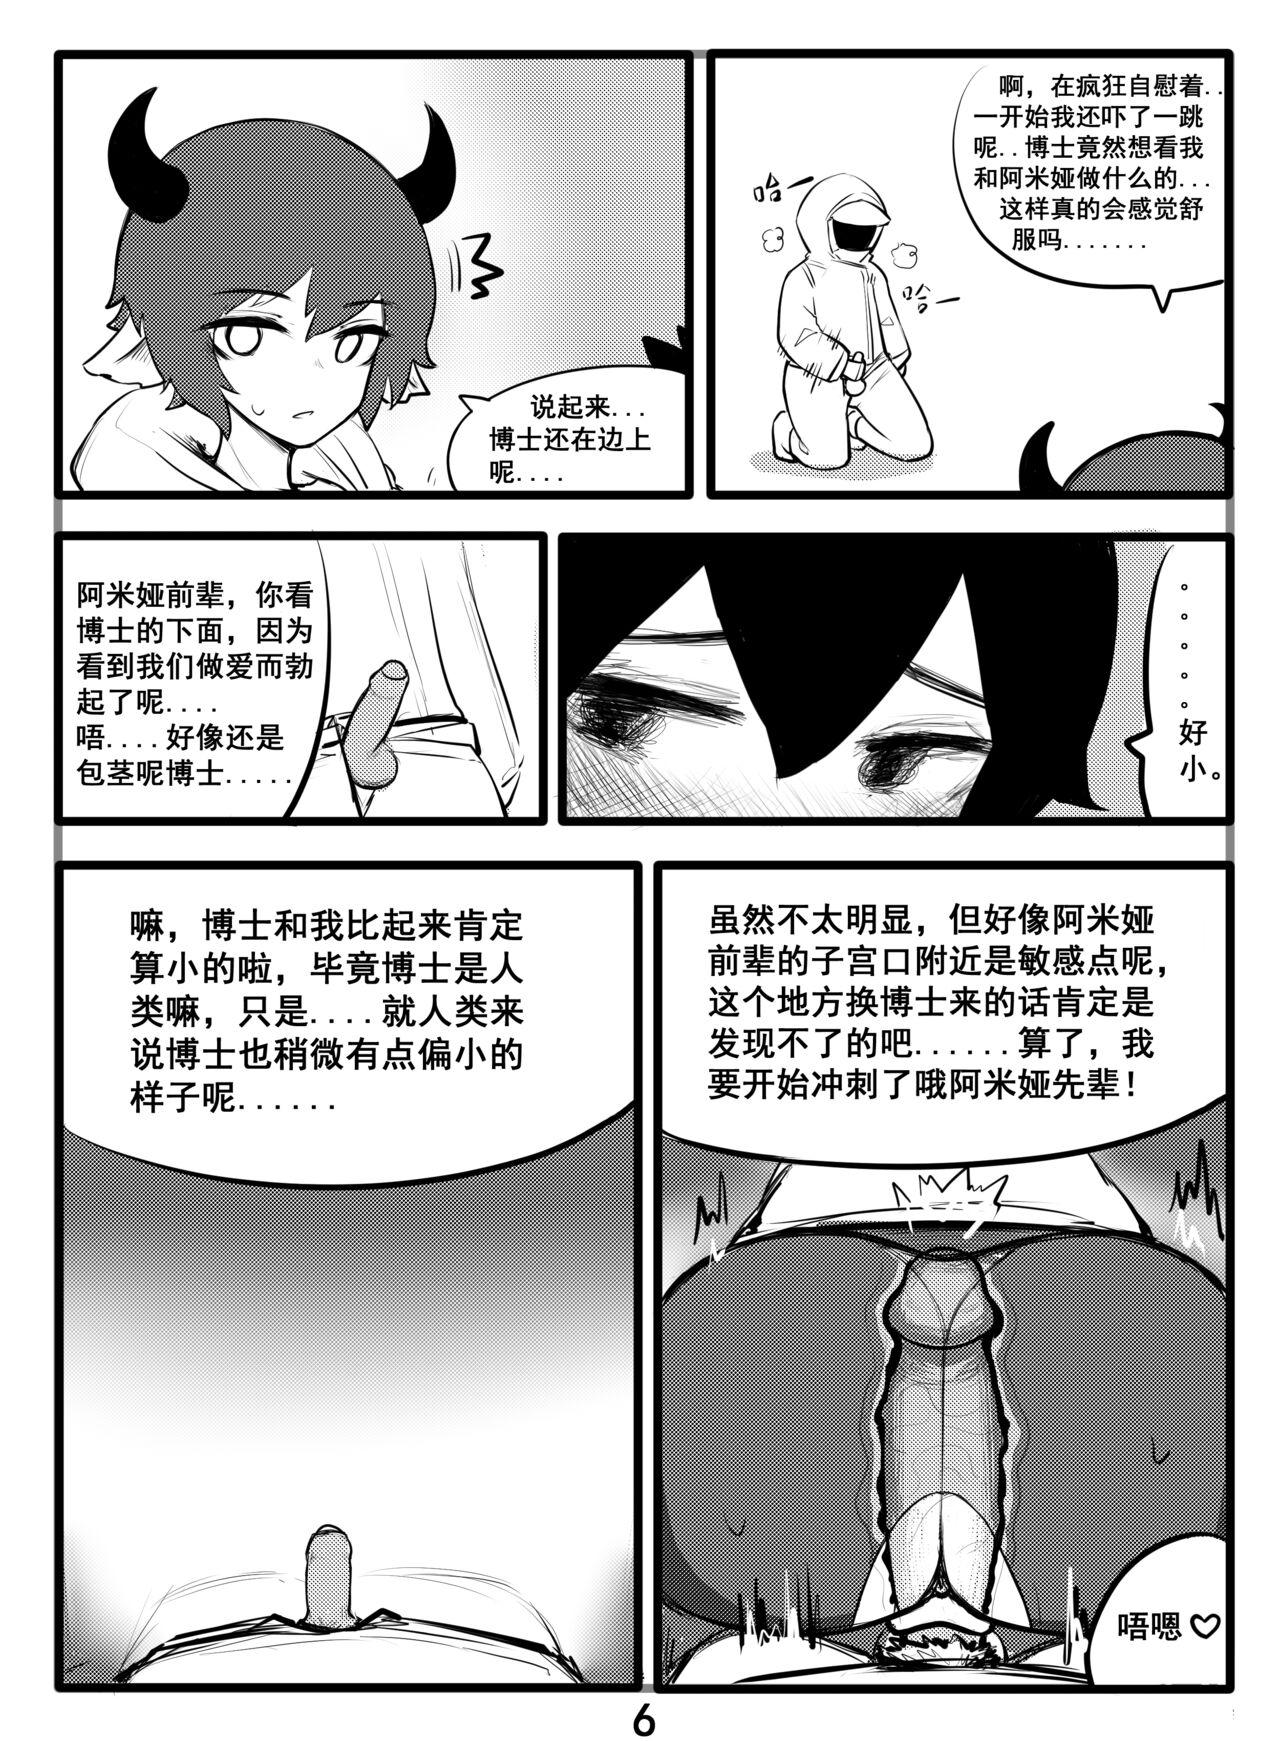 Toying 搬运杂图 Pool - Page 6